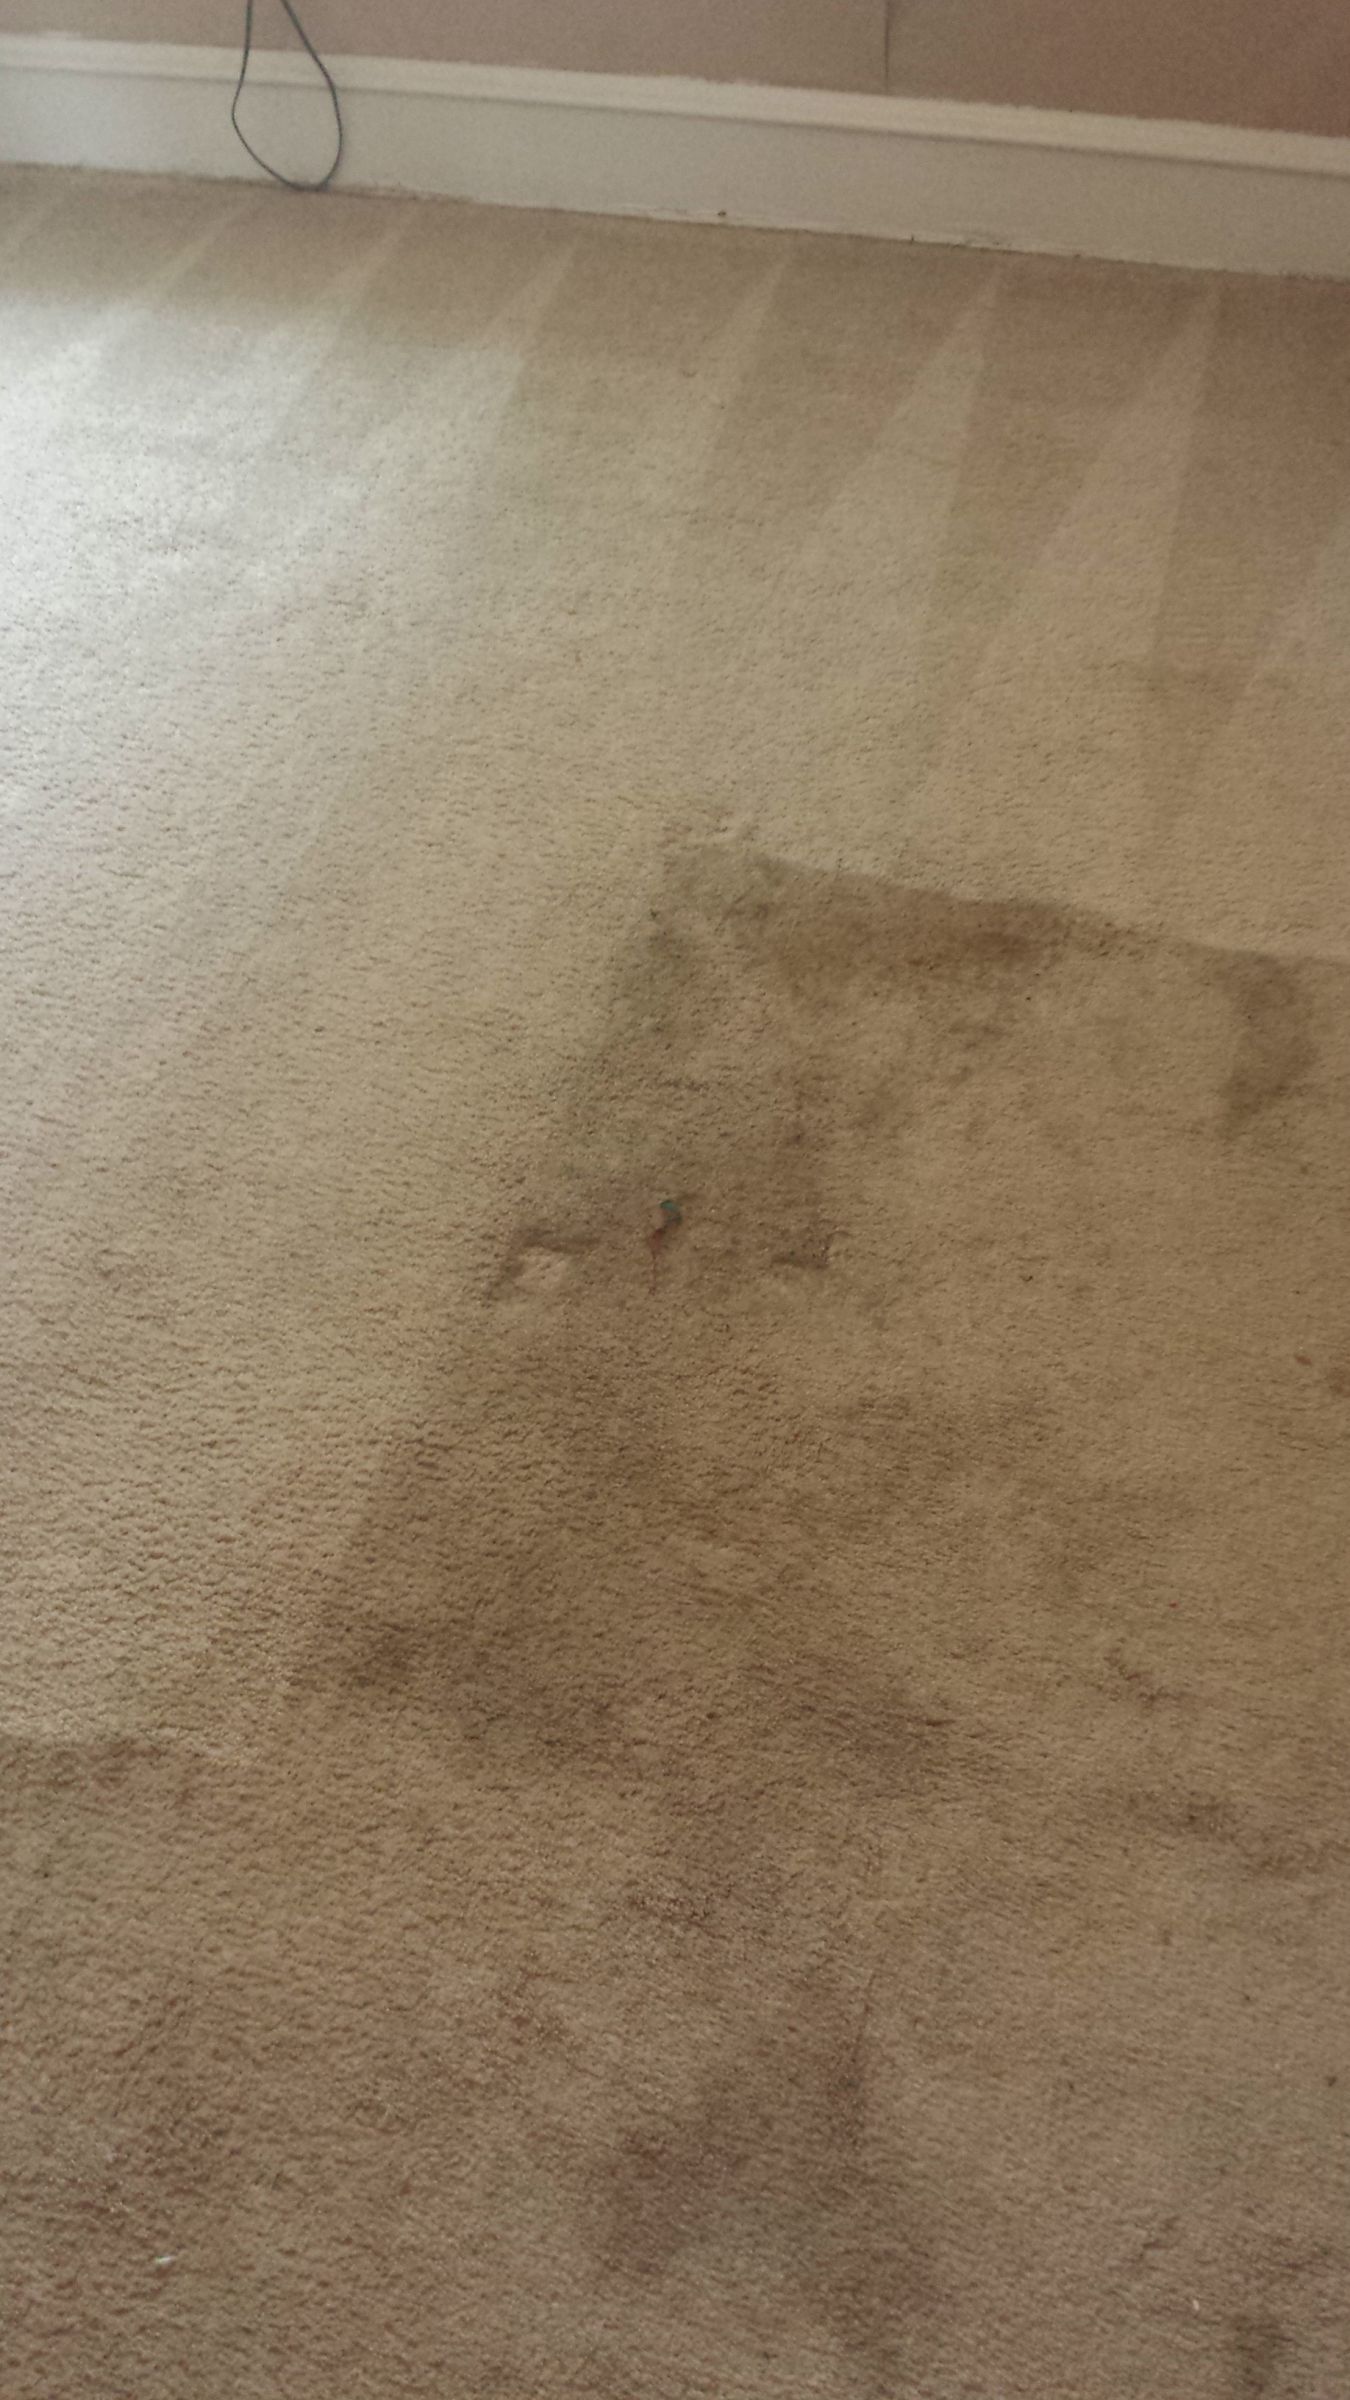 Cherry hill carpet cleaning